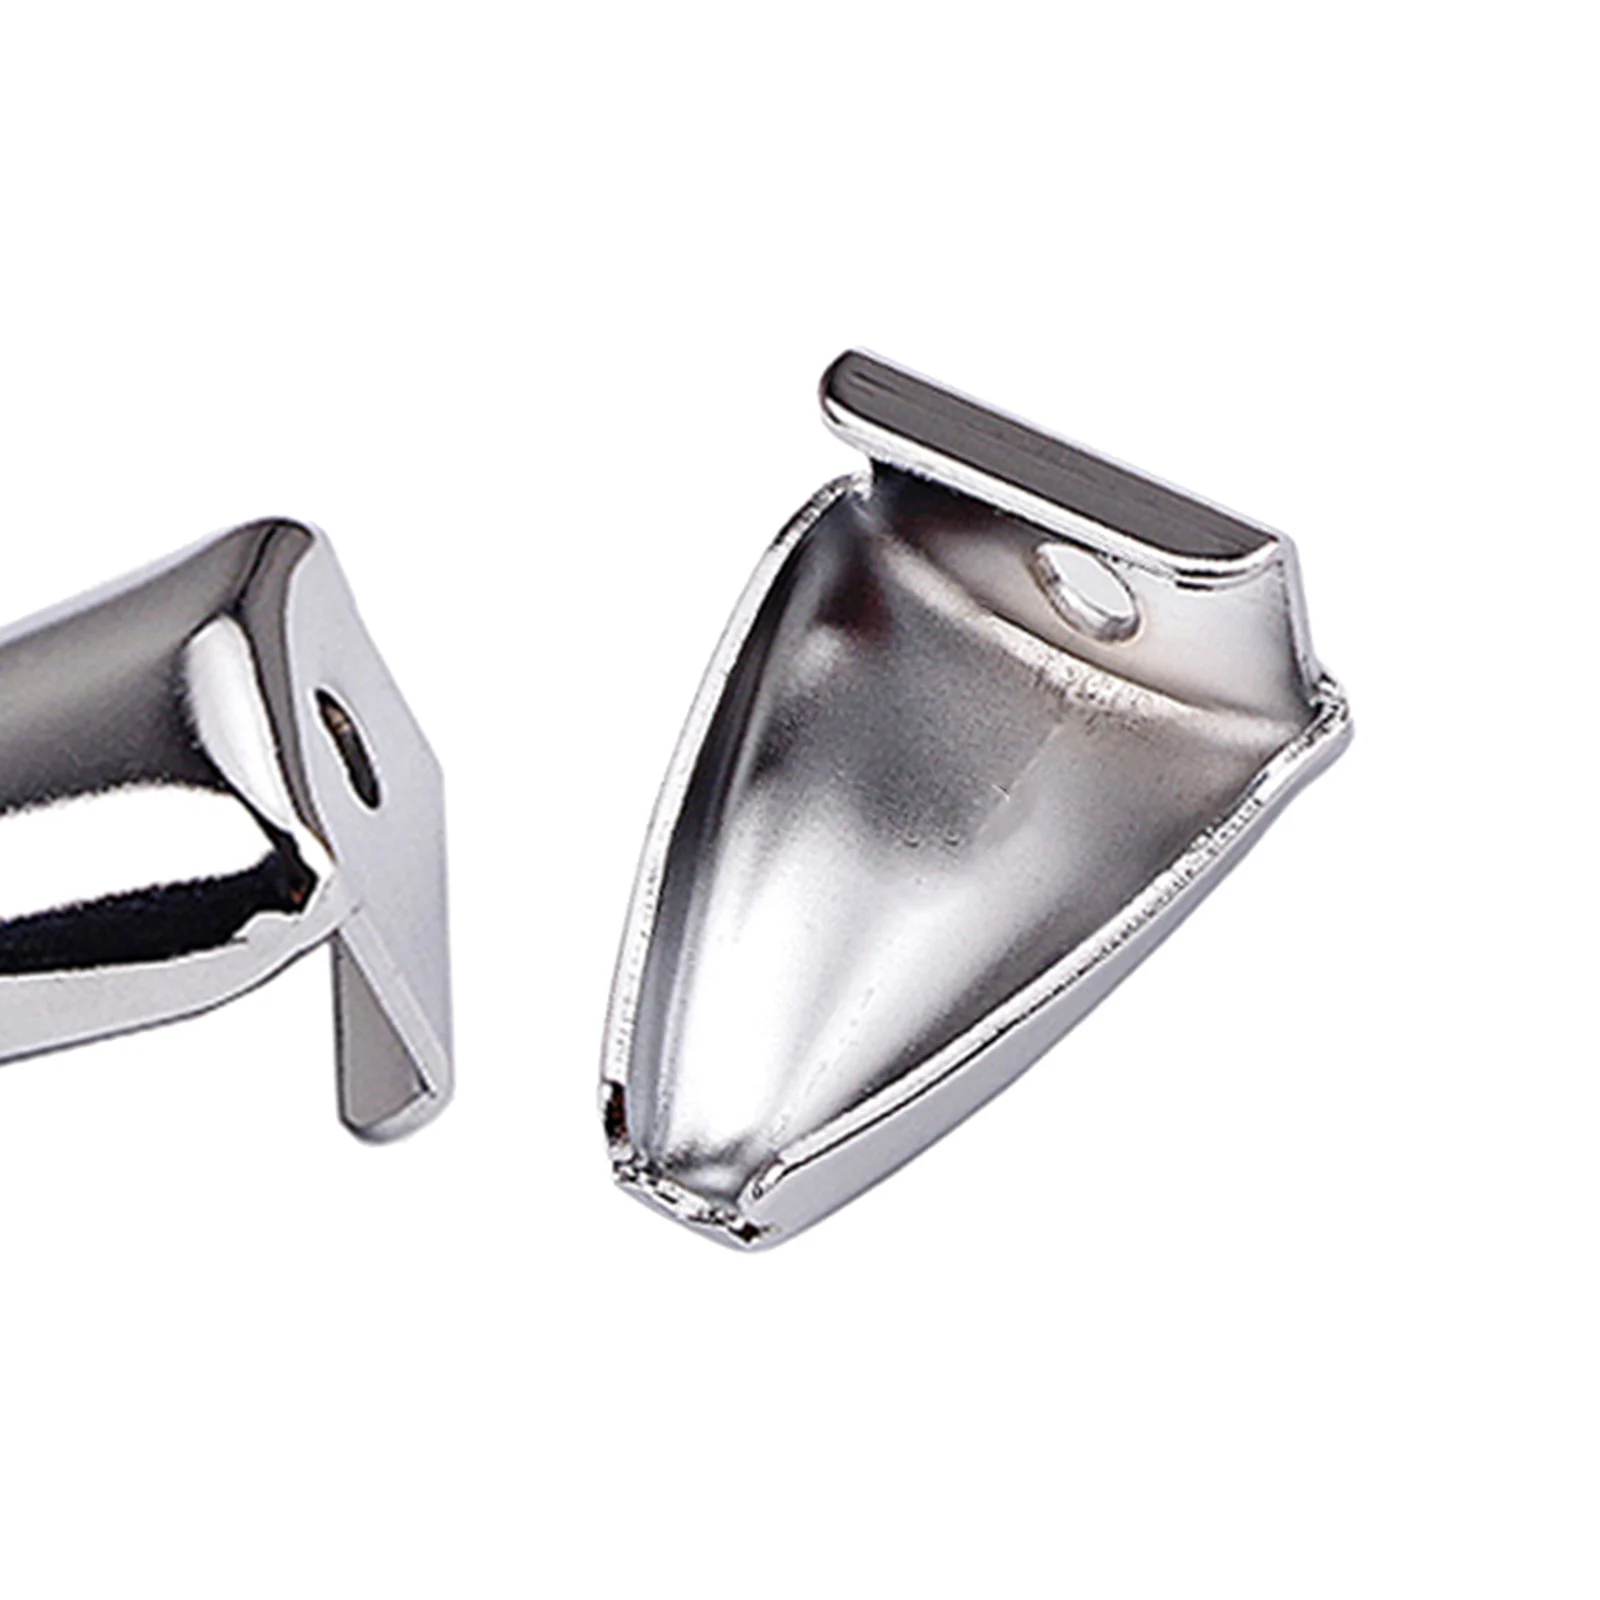 2 Pieces Iron Triangle Shape Drum Claw Hook for Bass Snare Drum Parts Accessories, sturdiness and durability,